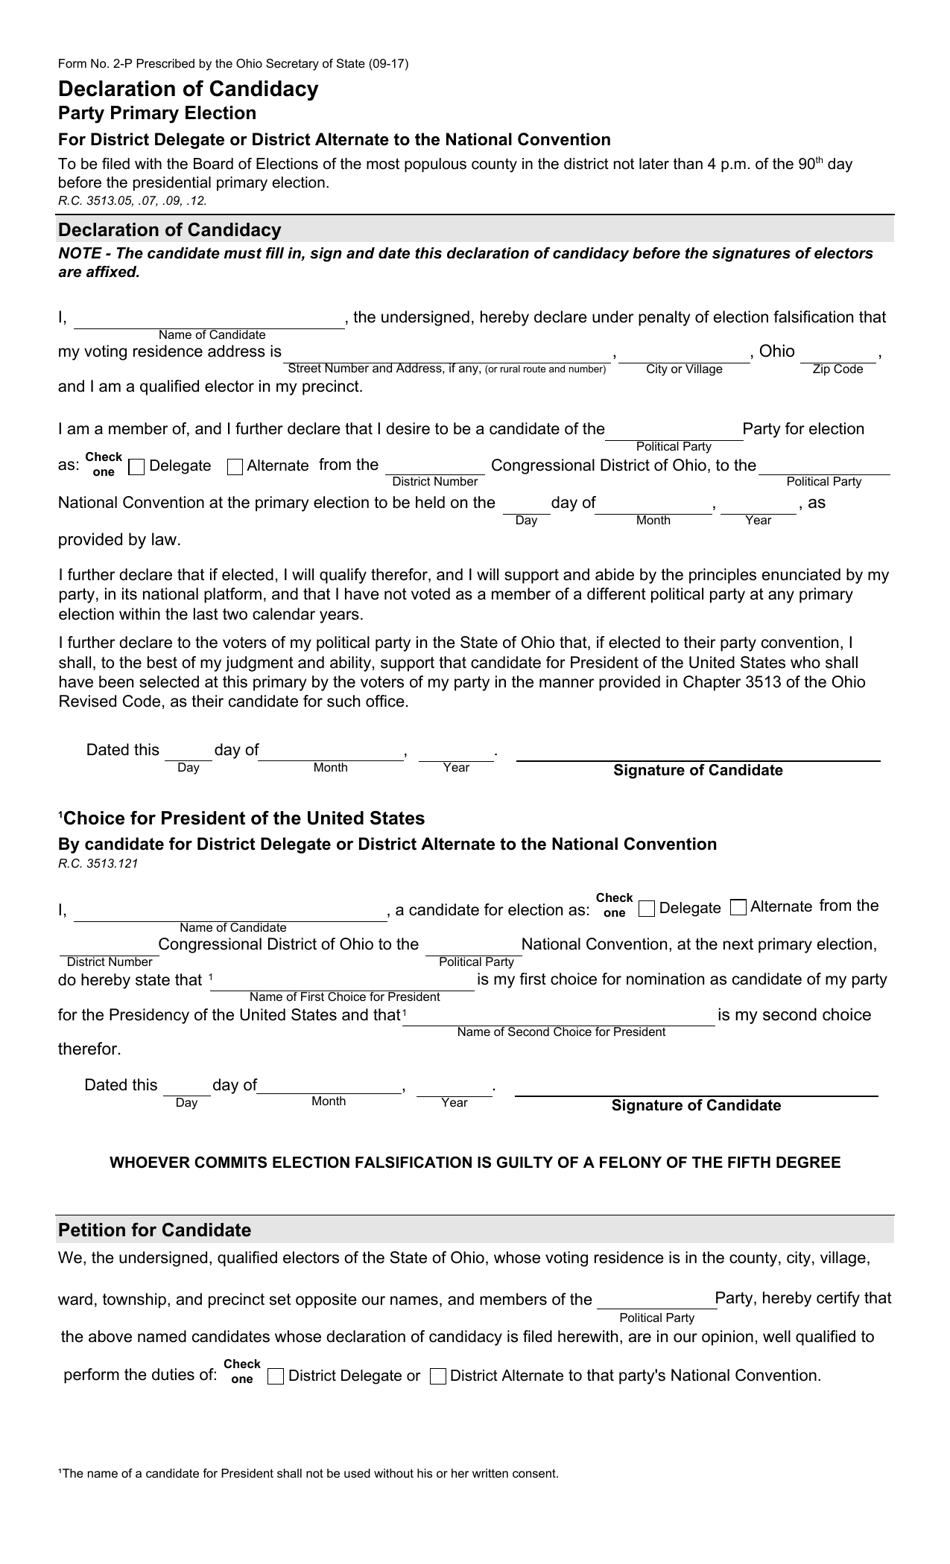 Form 2-P Declaration of Candidacy for District Delegate or District Alternate to the National Convention - Party Primary Election - Ohio, Page 1